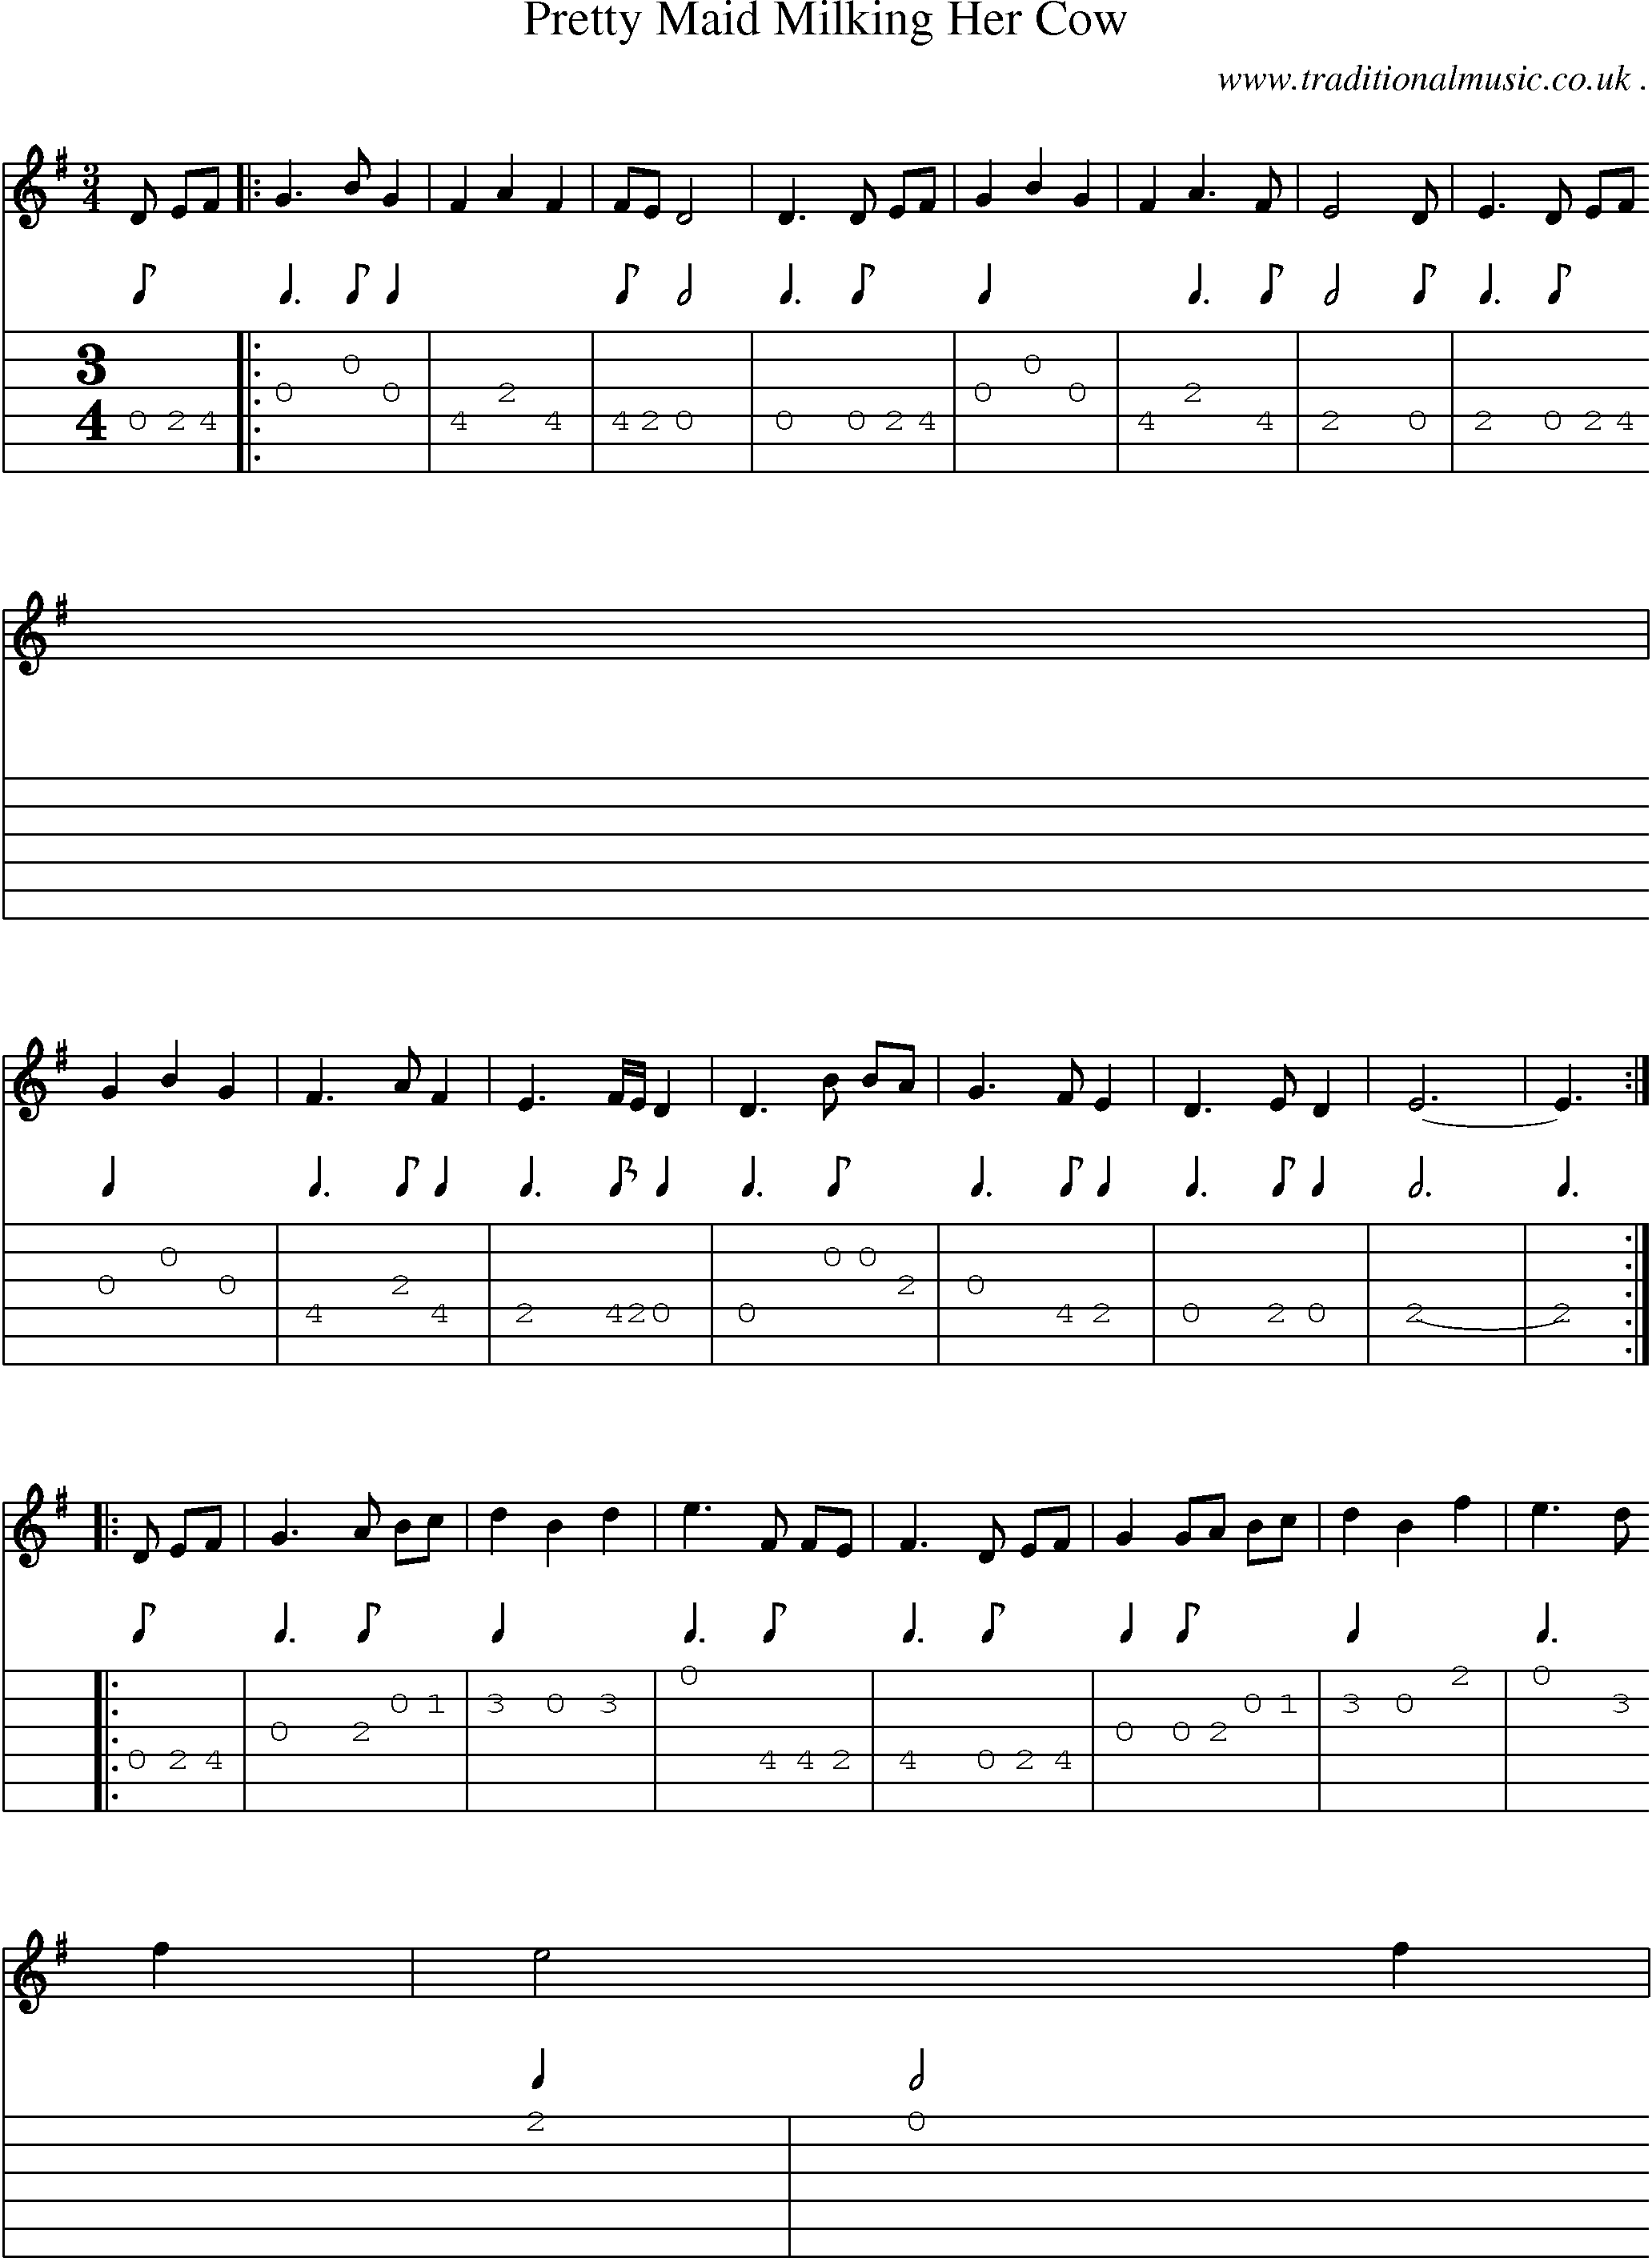 Sheet-music  score, Chords and Guitar Tabs for Pretty Maid Milking Her Cow